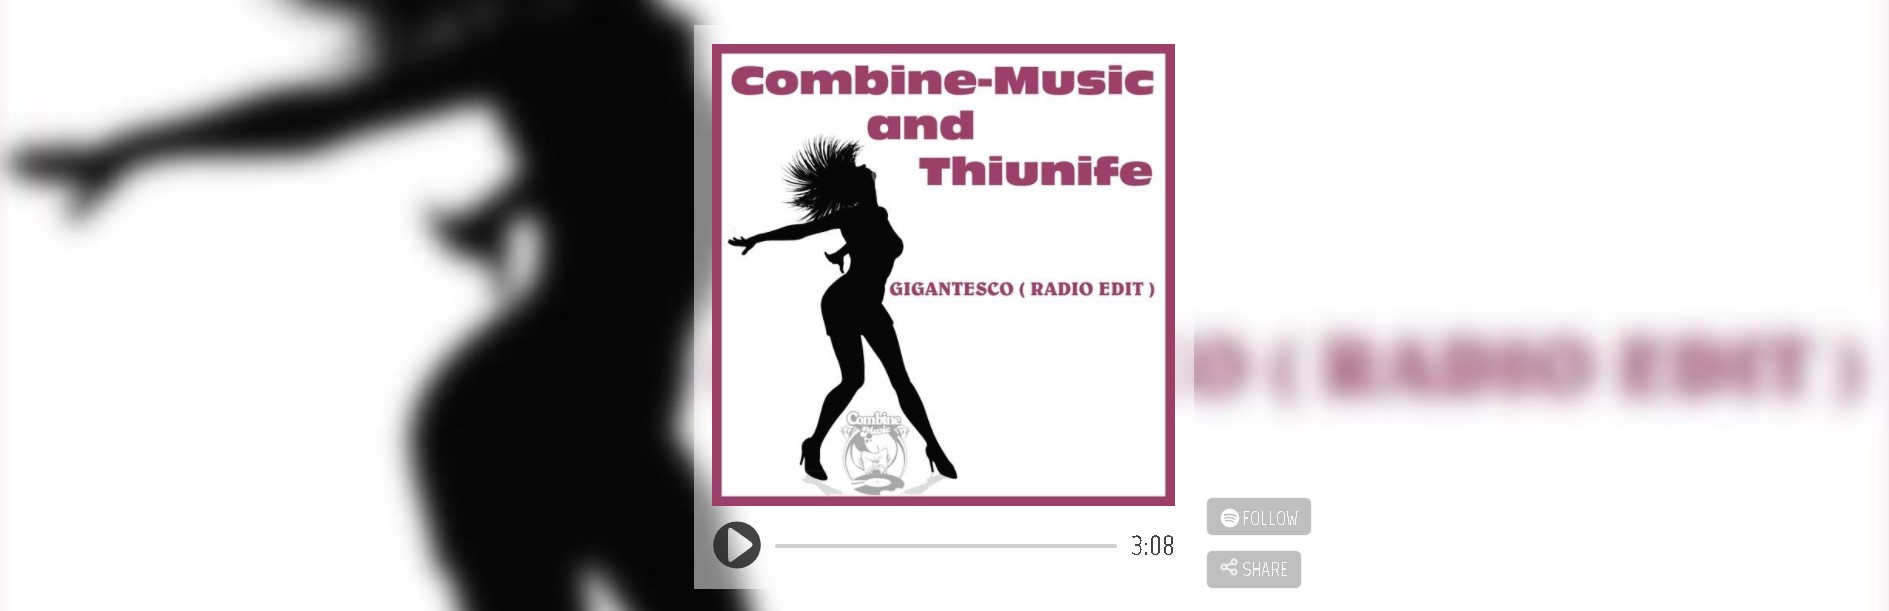 Combine-Music and Thiunife